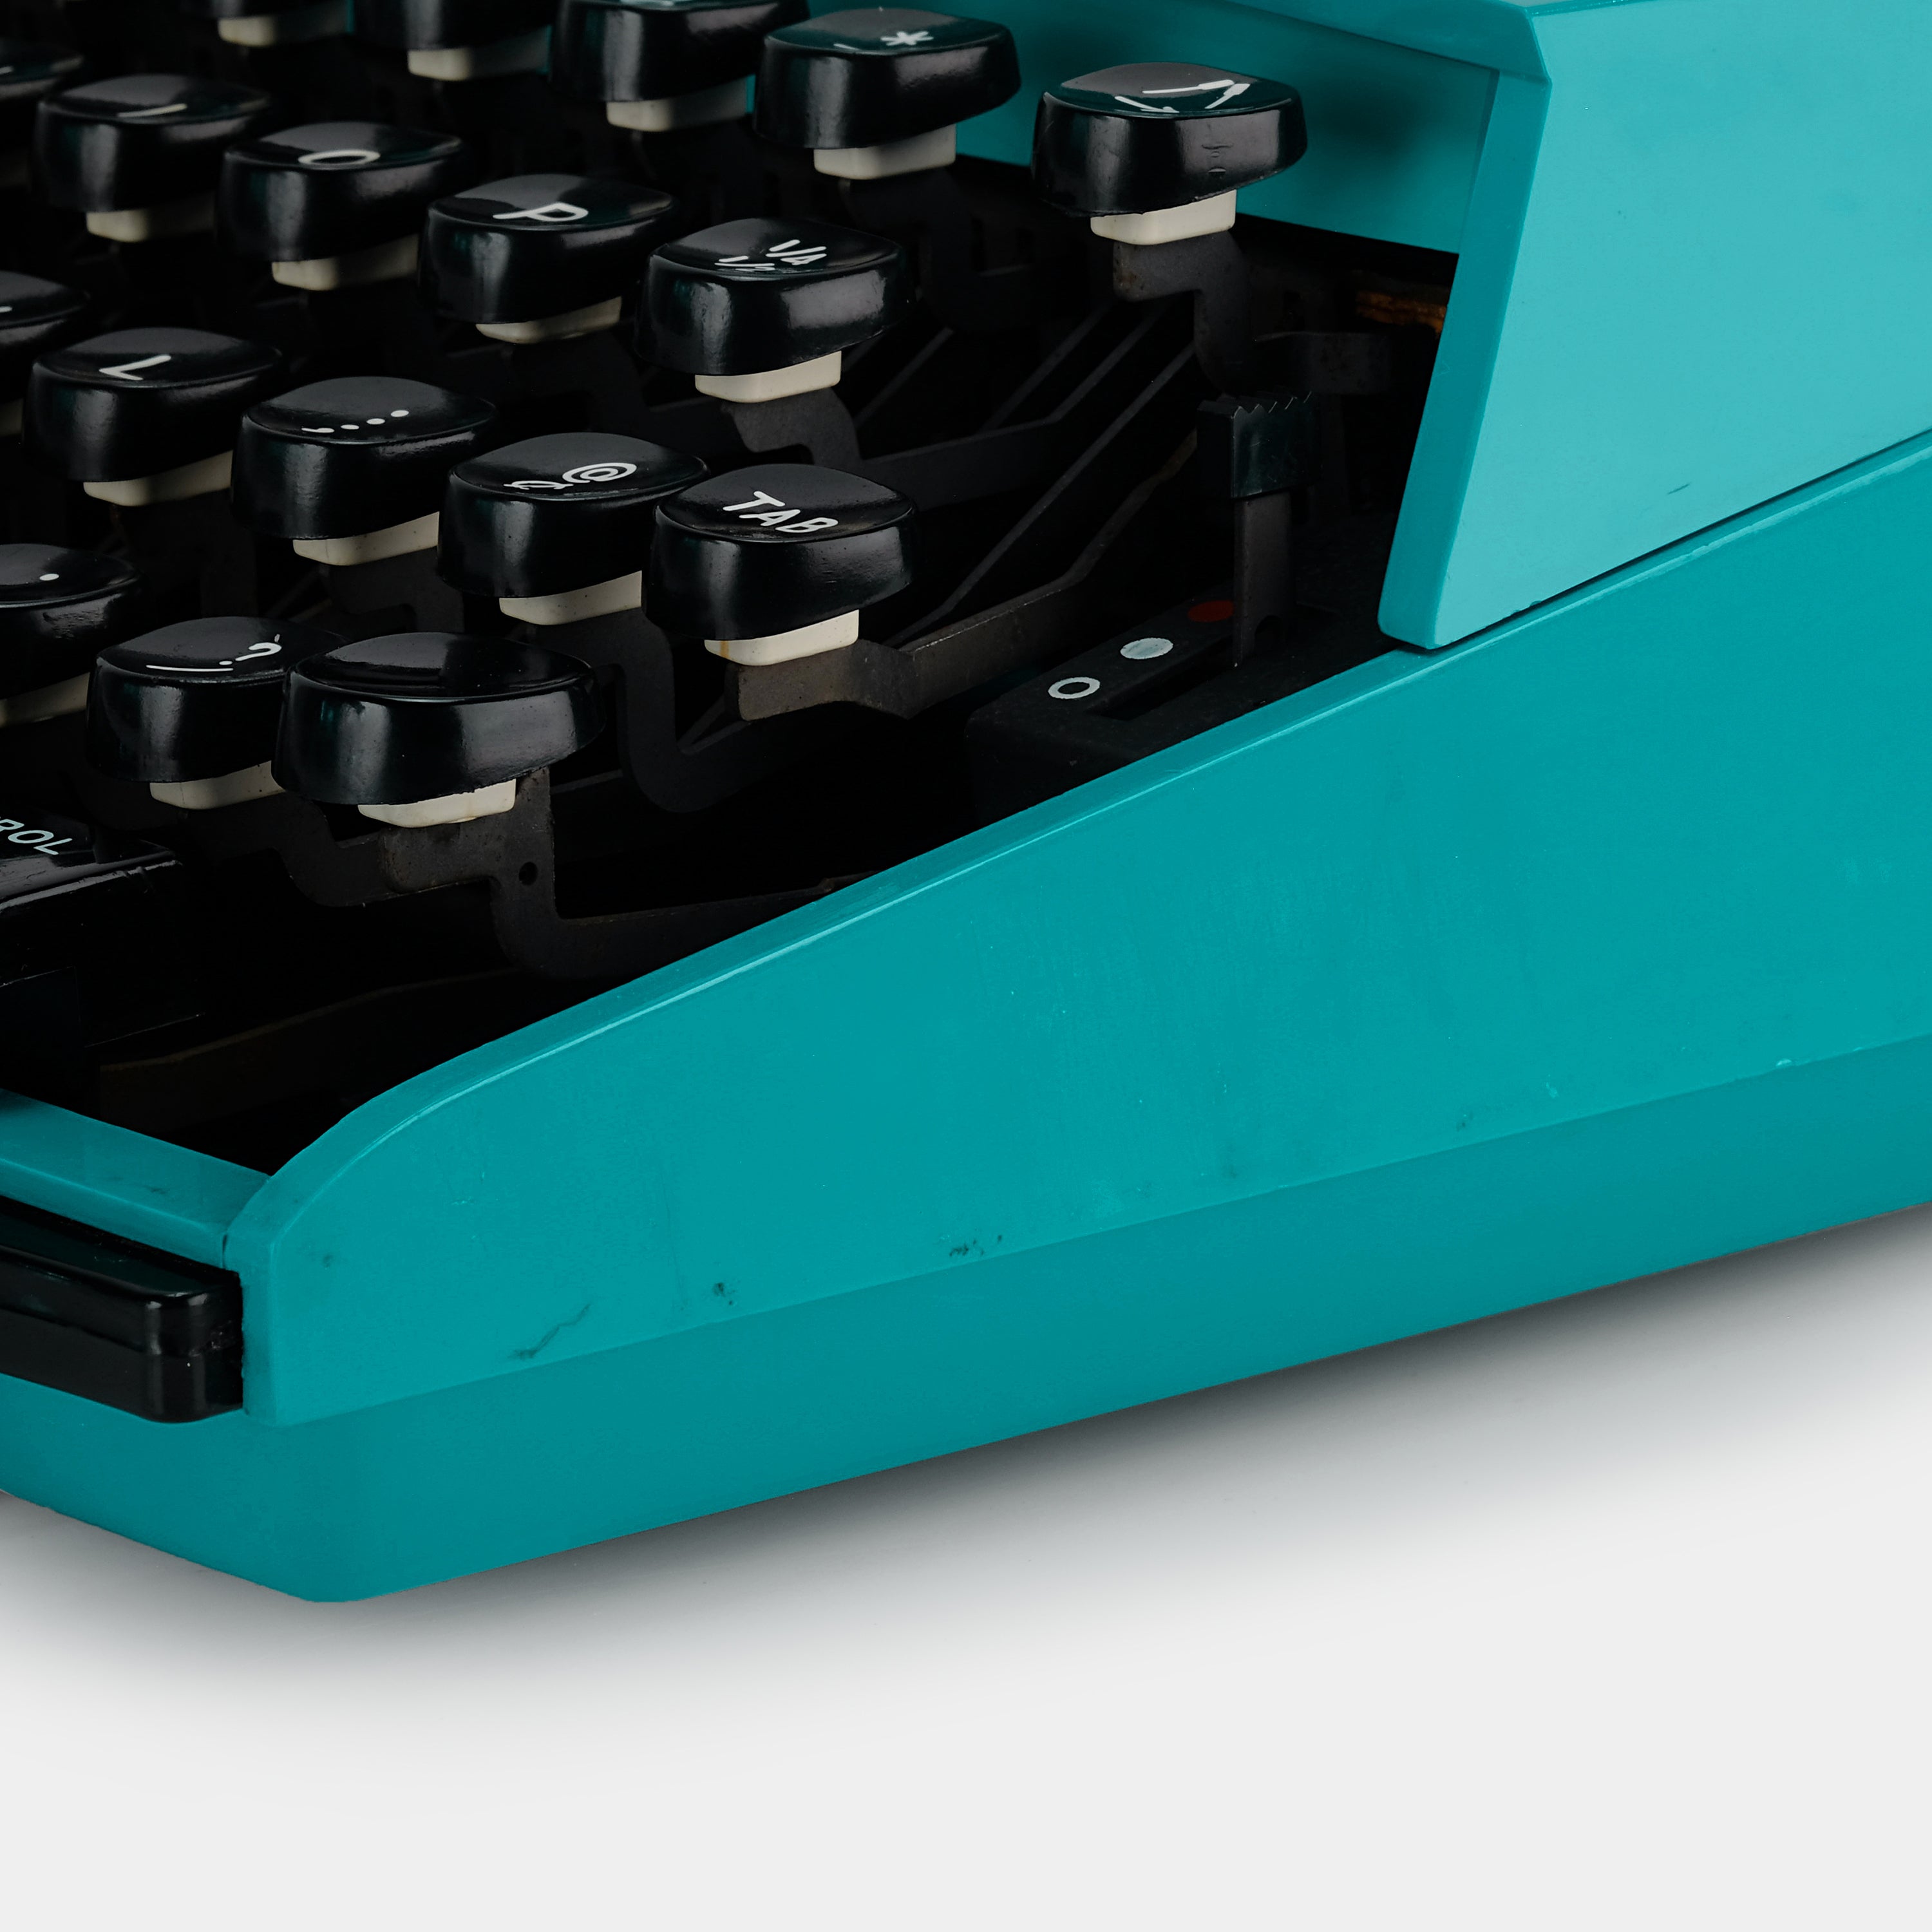 Smith-Corona Design by Ghia Turquoise Manual Typewriter and Case